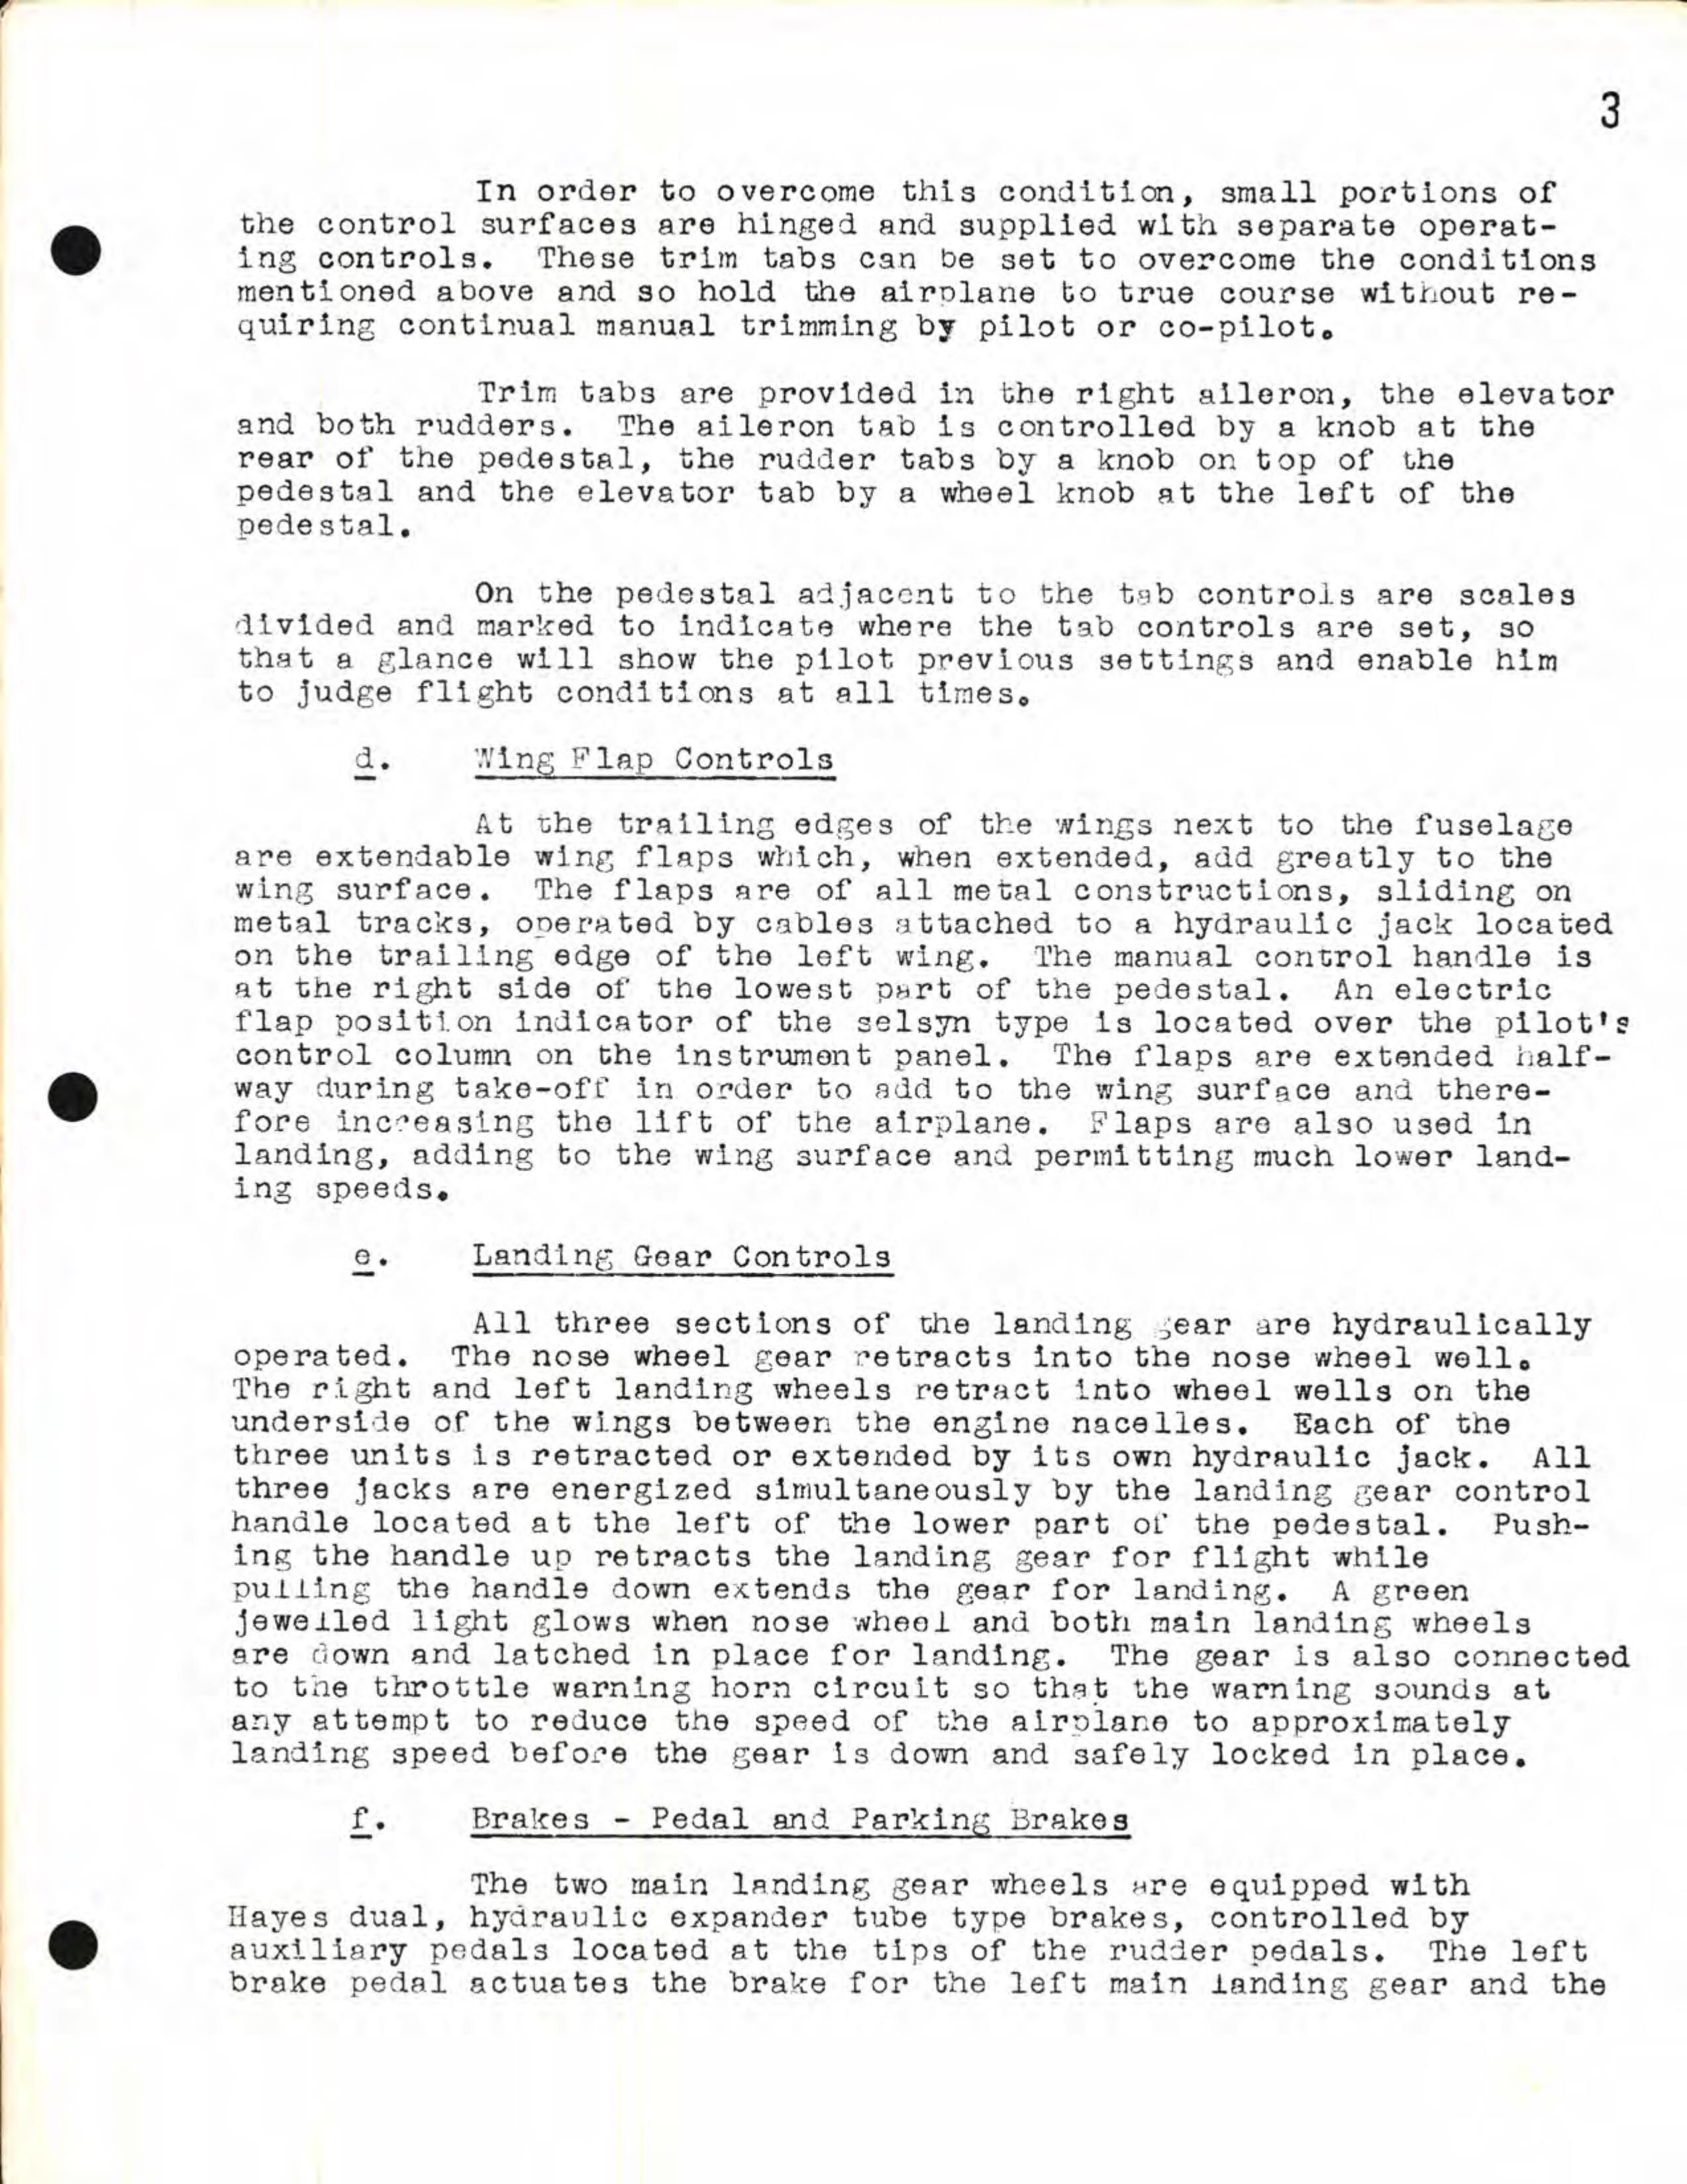 Sample page 13 from AirCorps Library document: Preliminary Handbook of Instructions for the B-24D